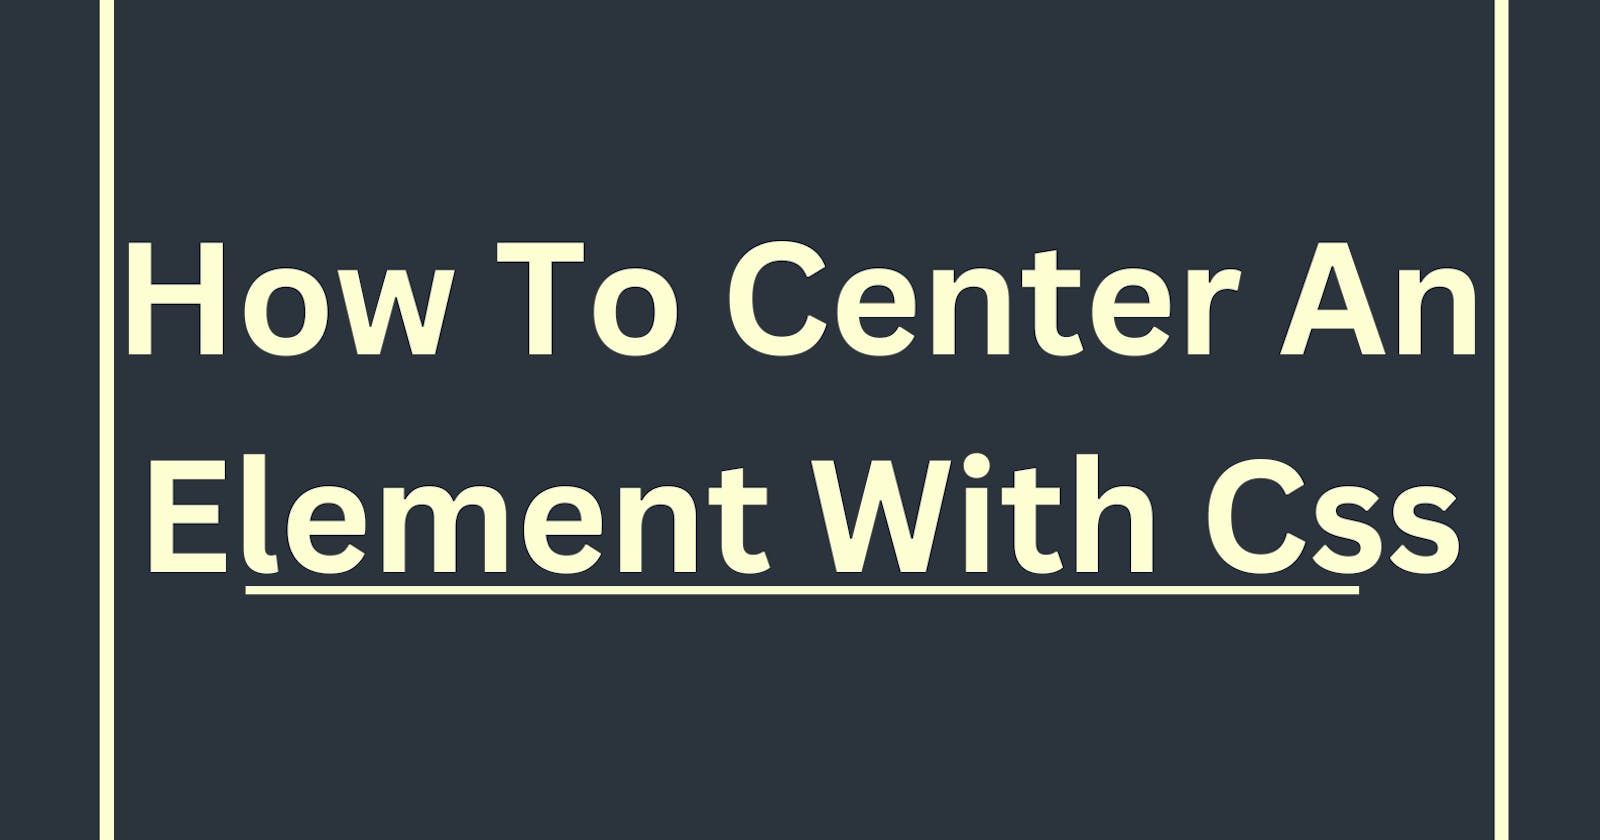 How To Center An Element With CSS